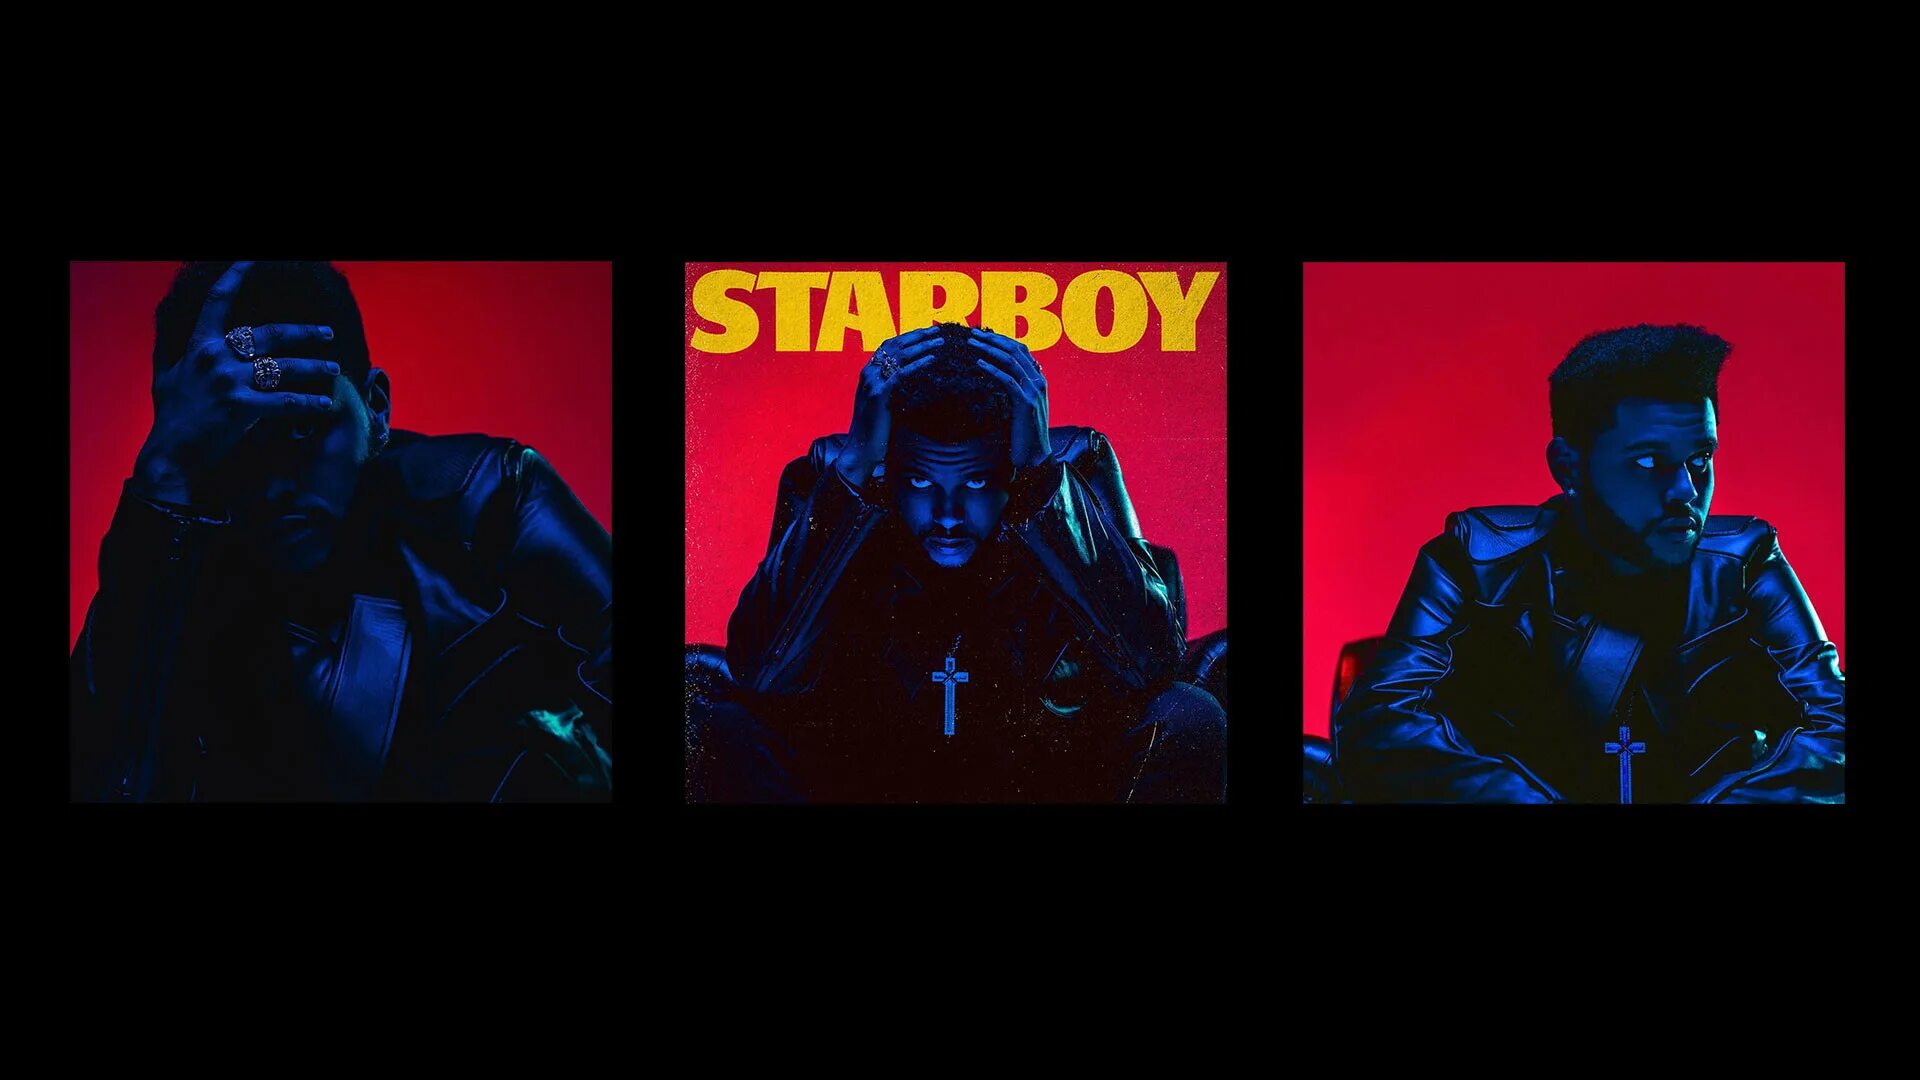 The Weeknd 2022. The Weeknd Starboy album Cover. Starboy the Weeknd обложка. The Weeknd Эстетика. Star boy the weekend